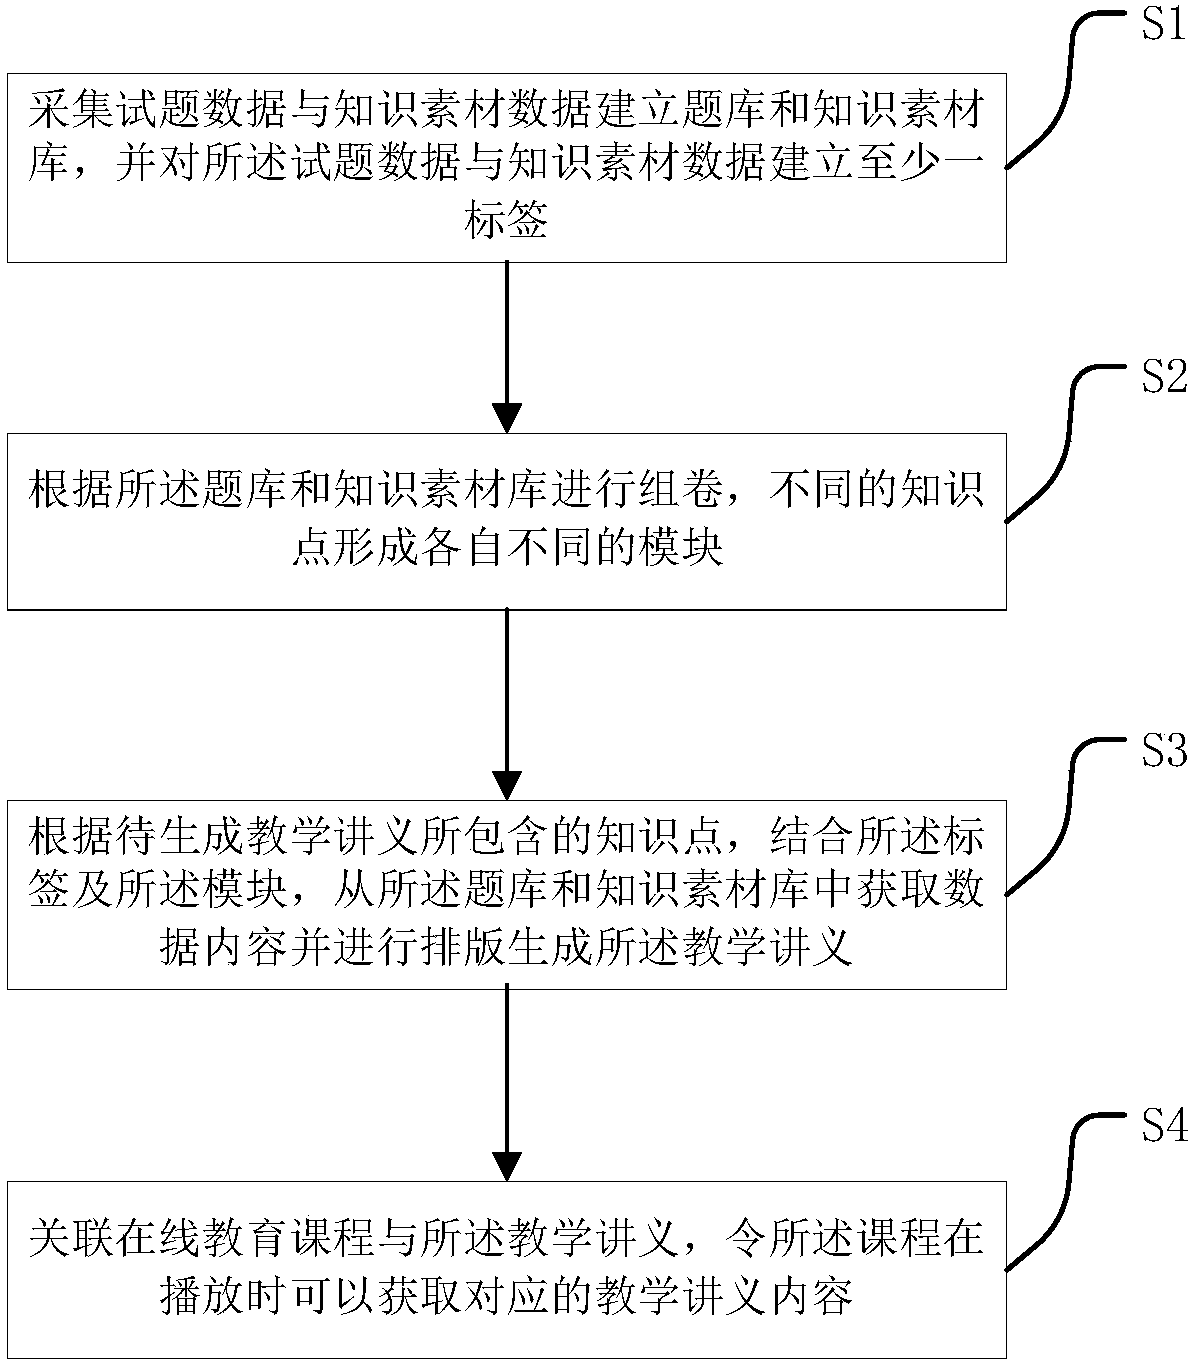 Question bank system-based teaching note generation method and device